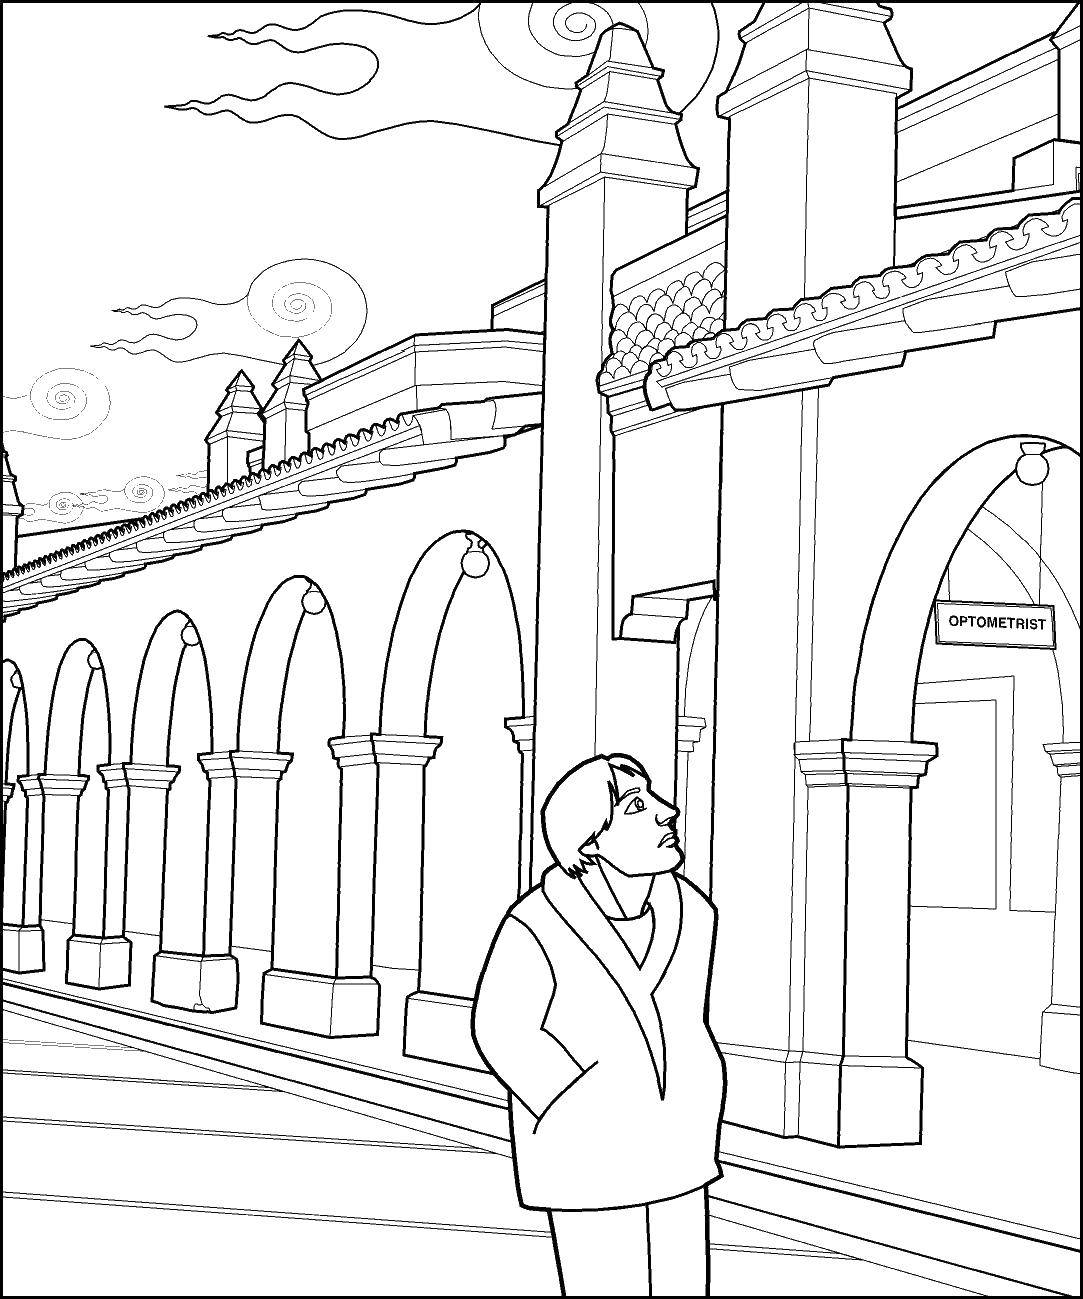 Coloring The man at the building. Category building. Tags:  building, male, town.